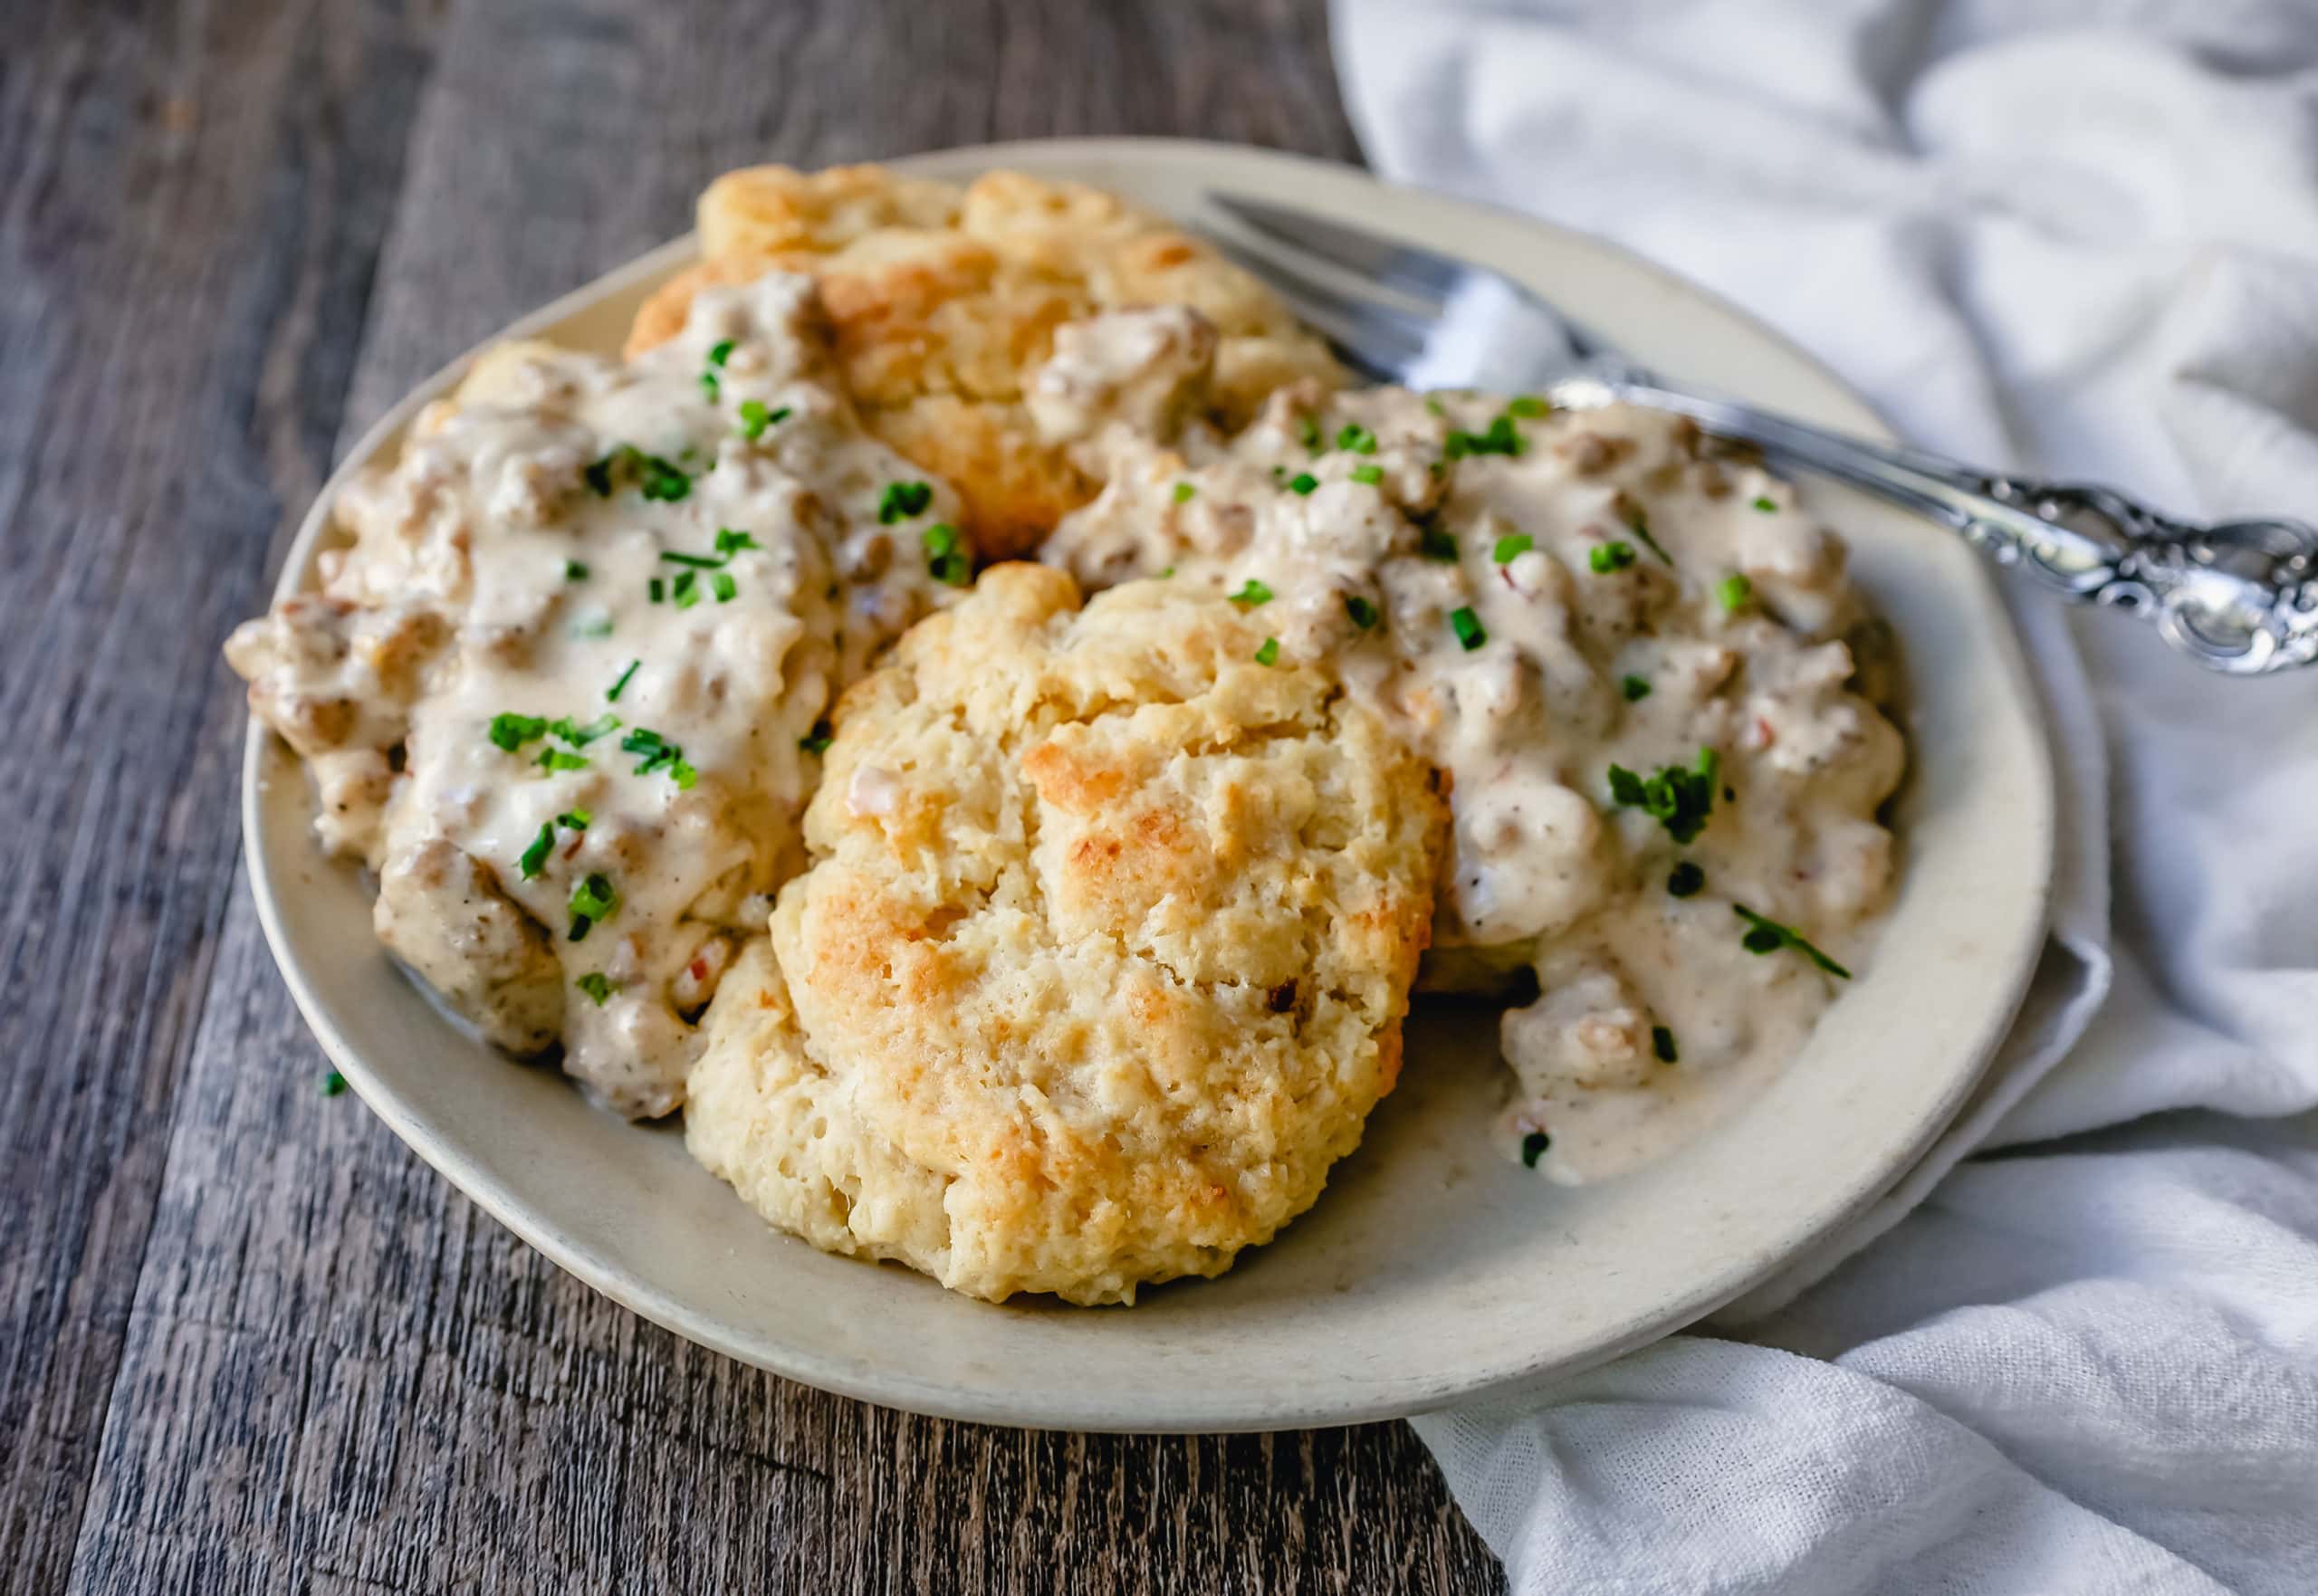 Homemade Biscuits and Gravy Buttery, flaky homemade biscuits topped with a creamy, savory sausage gravy. The best biscuits and gravy recipe!